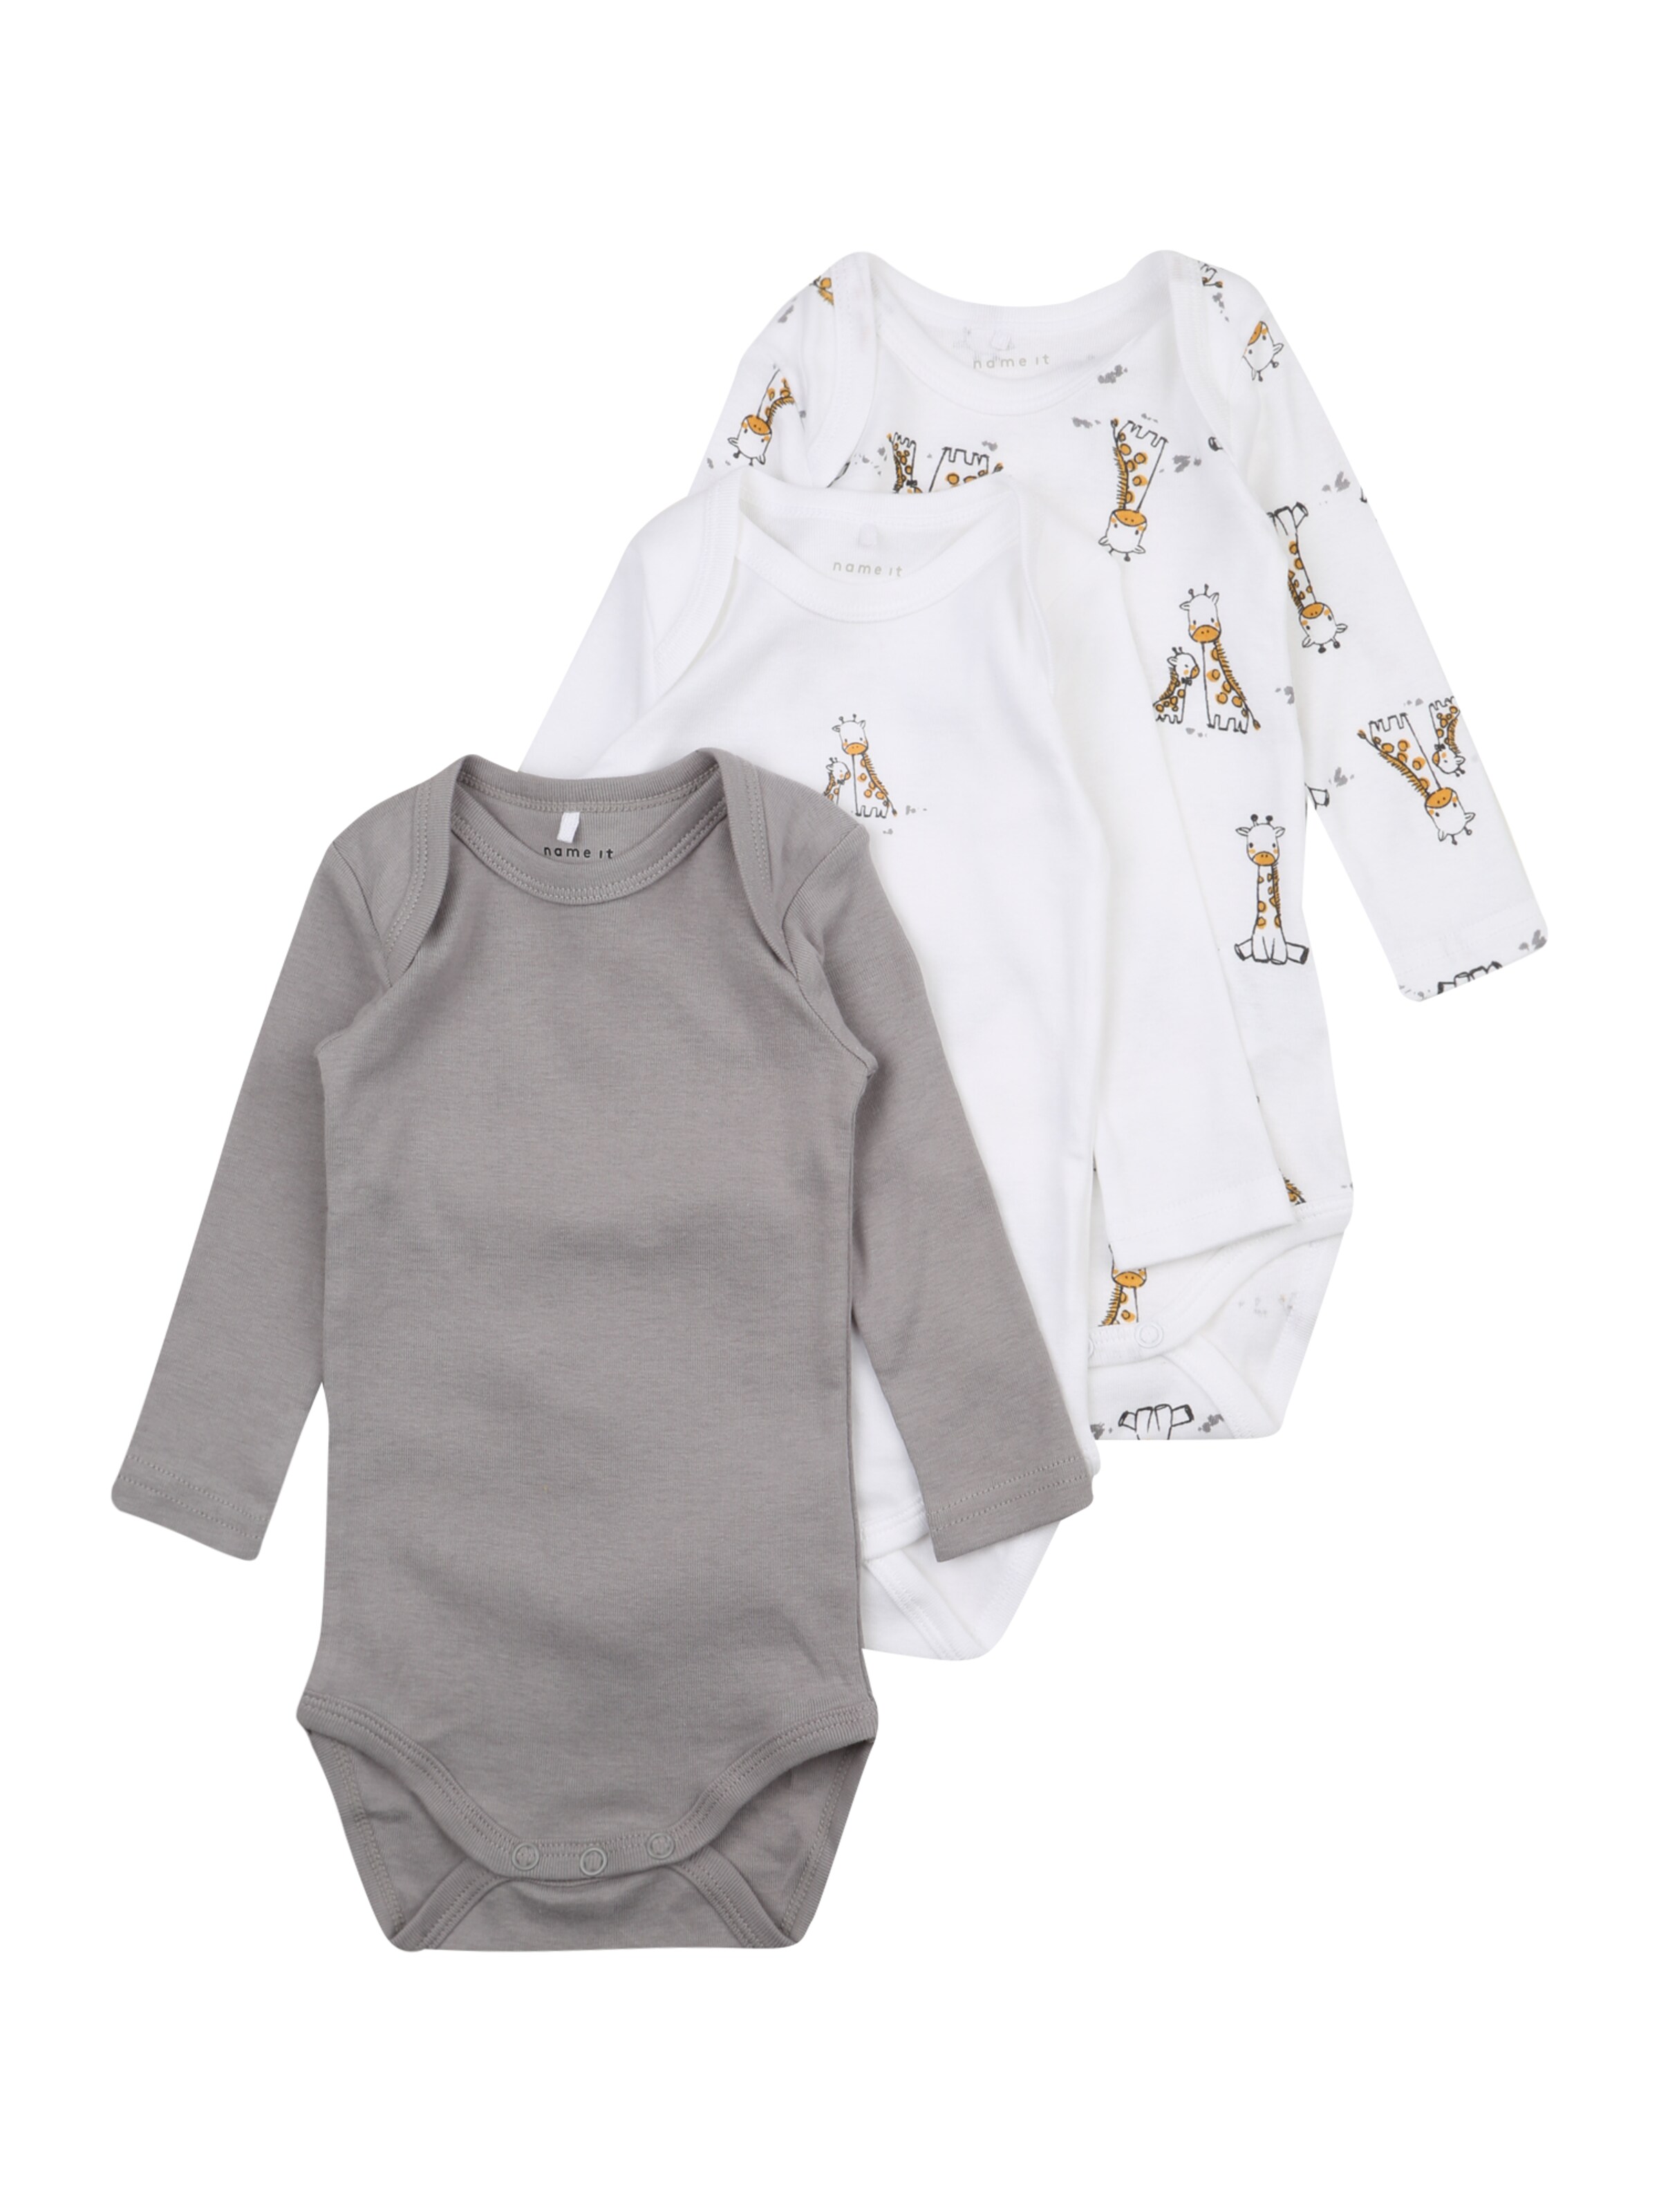 Kinder Kids (Gr. 92-140) NAME IT Body in Taupe, Weiß - AX50399